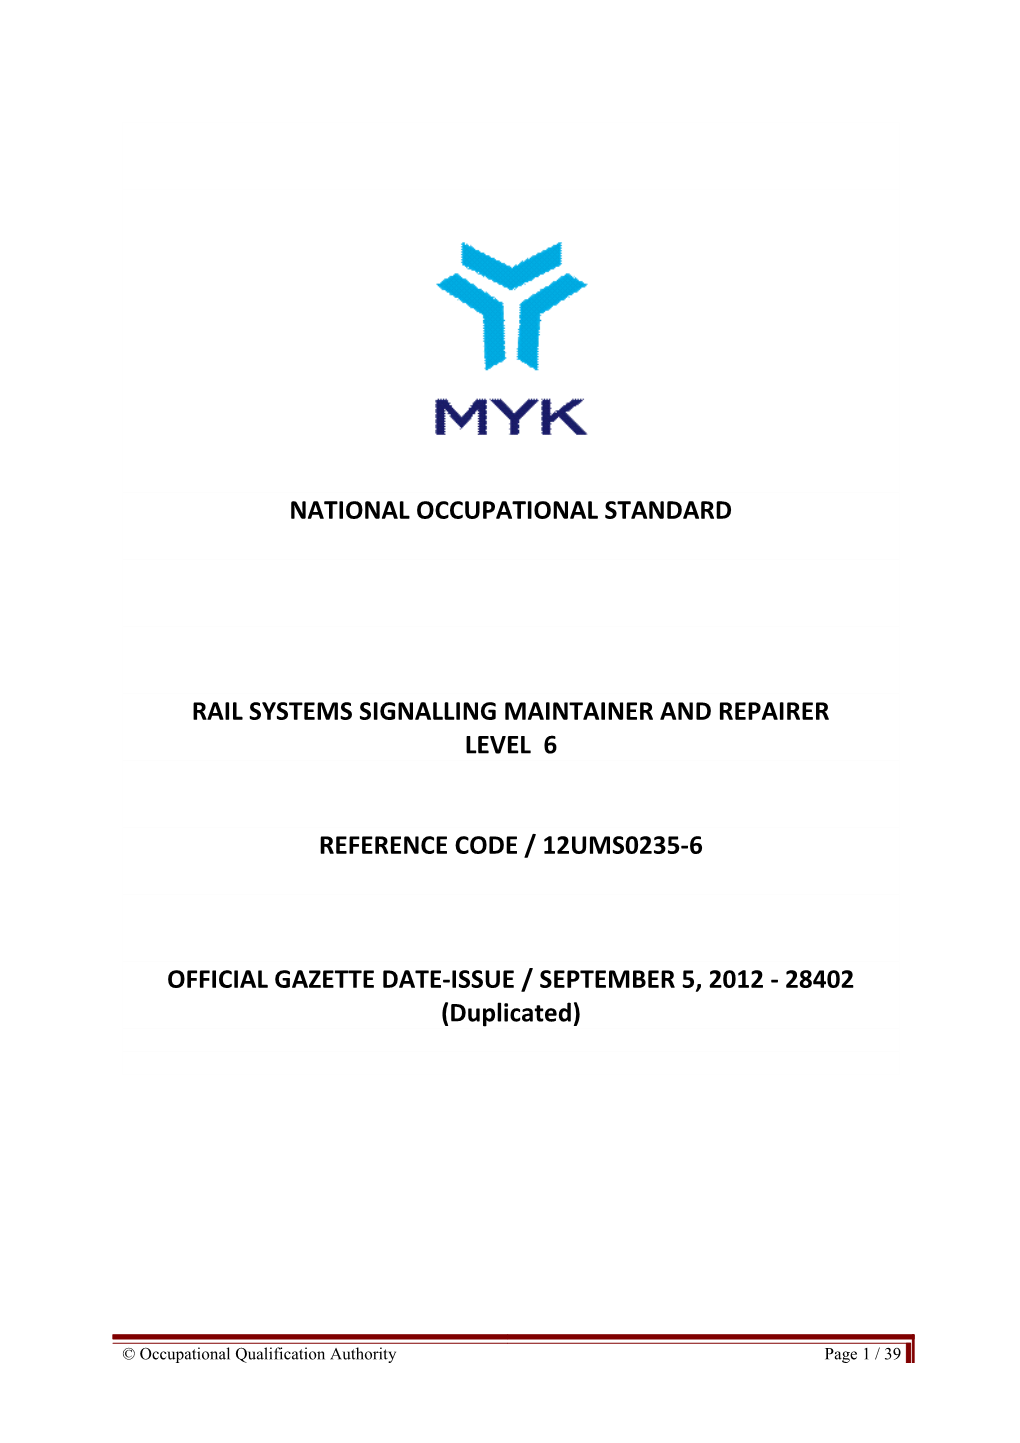 Rail Systems Signalling Maintainer and Repairer